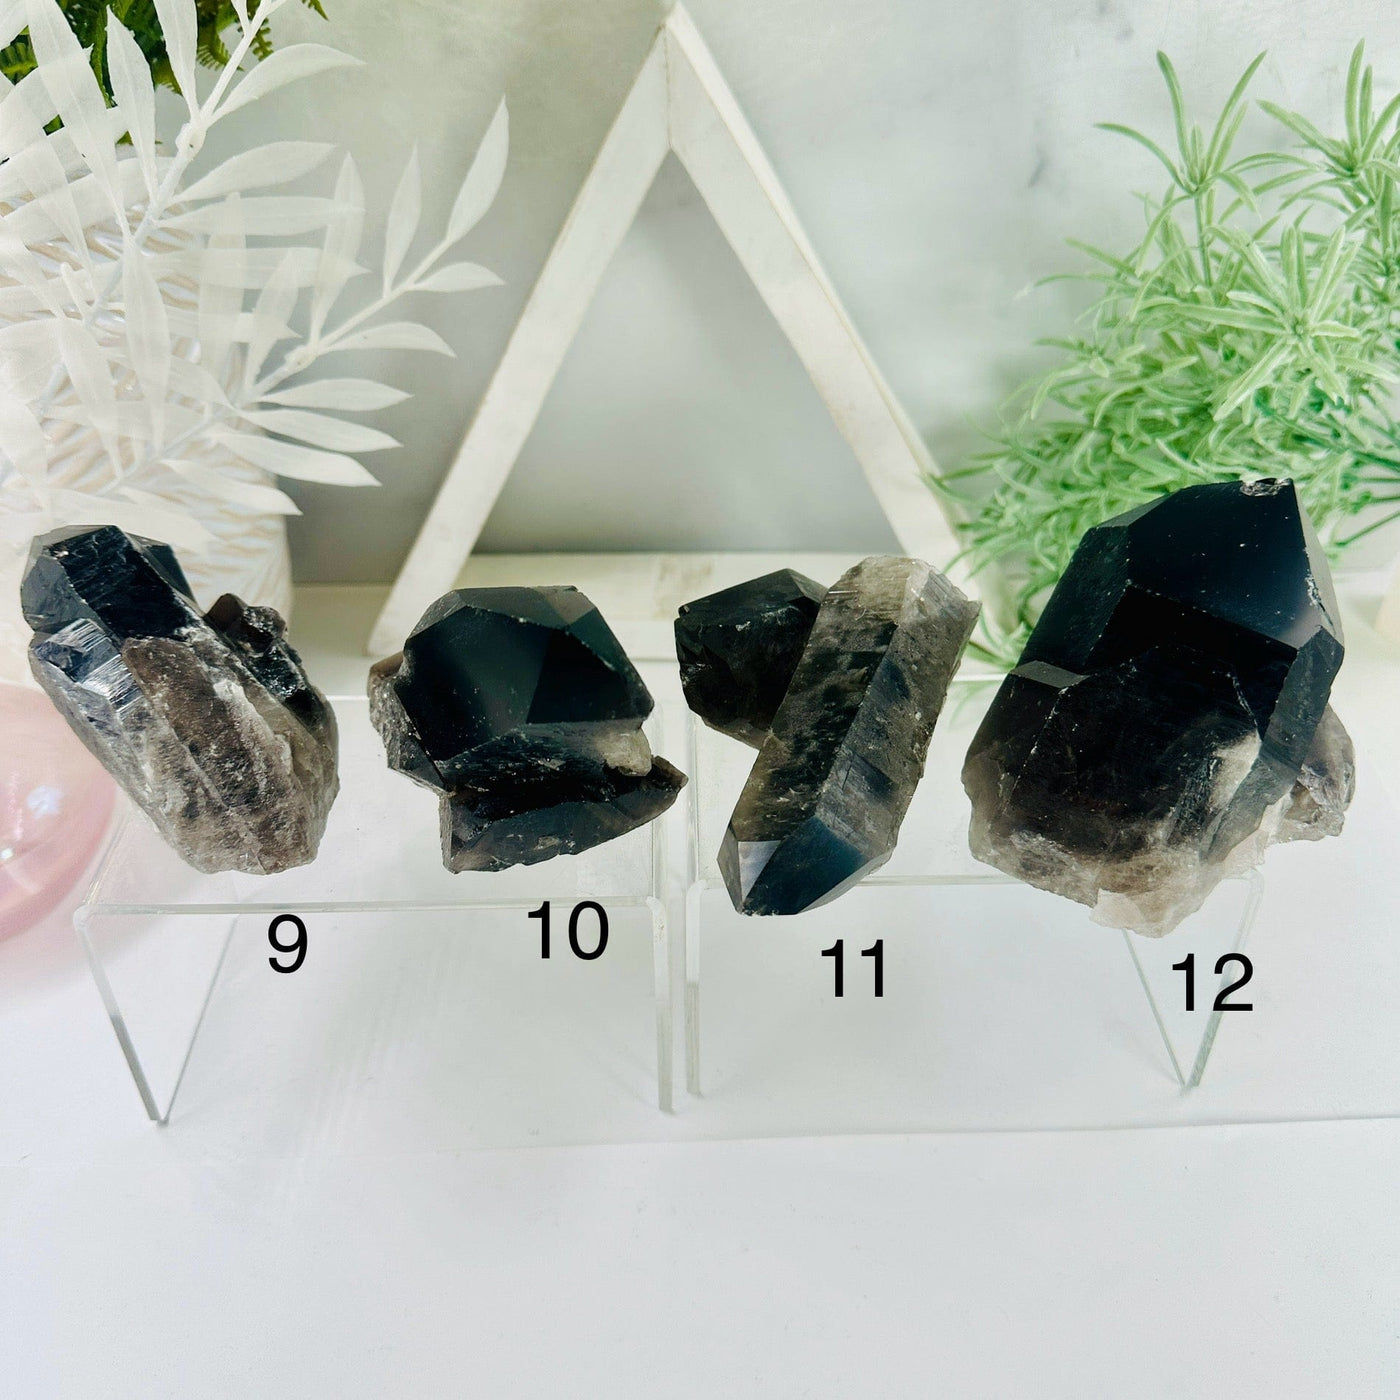 Smoky Quartz Cluster - Natural Raw Crystals - YOU CHOOSE variants 9 10 11 12 labeled